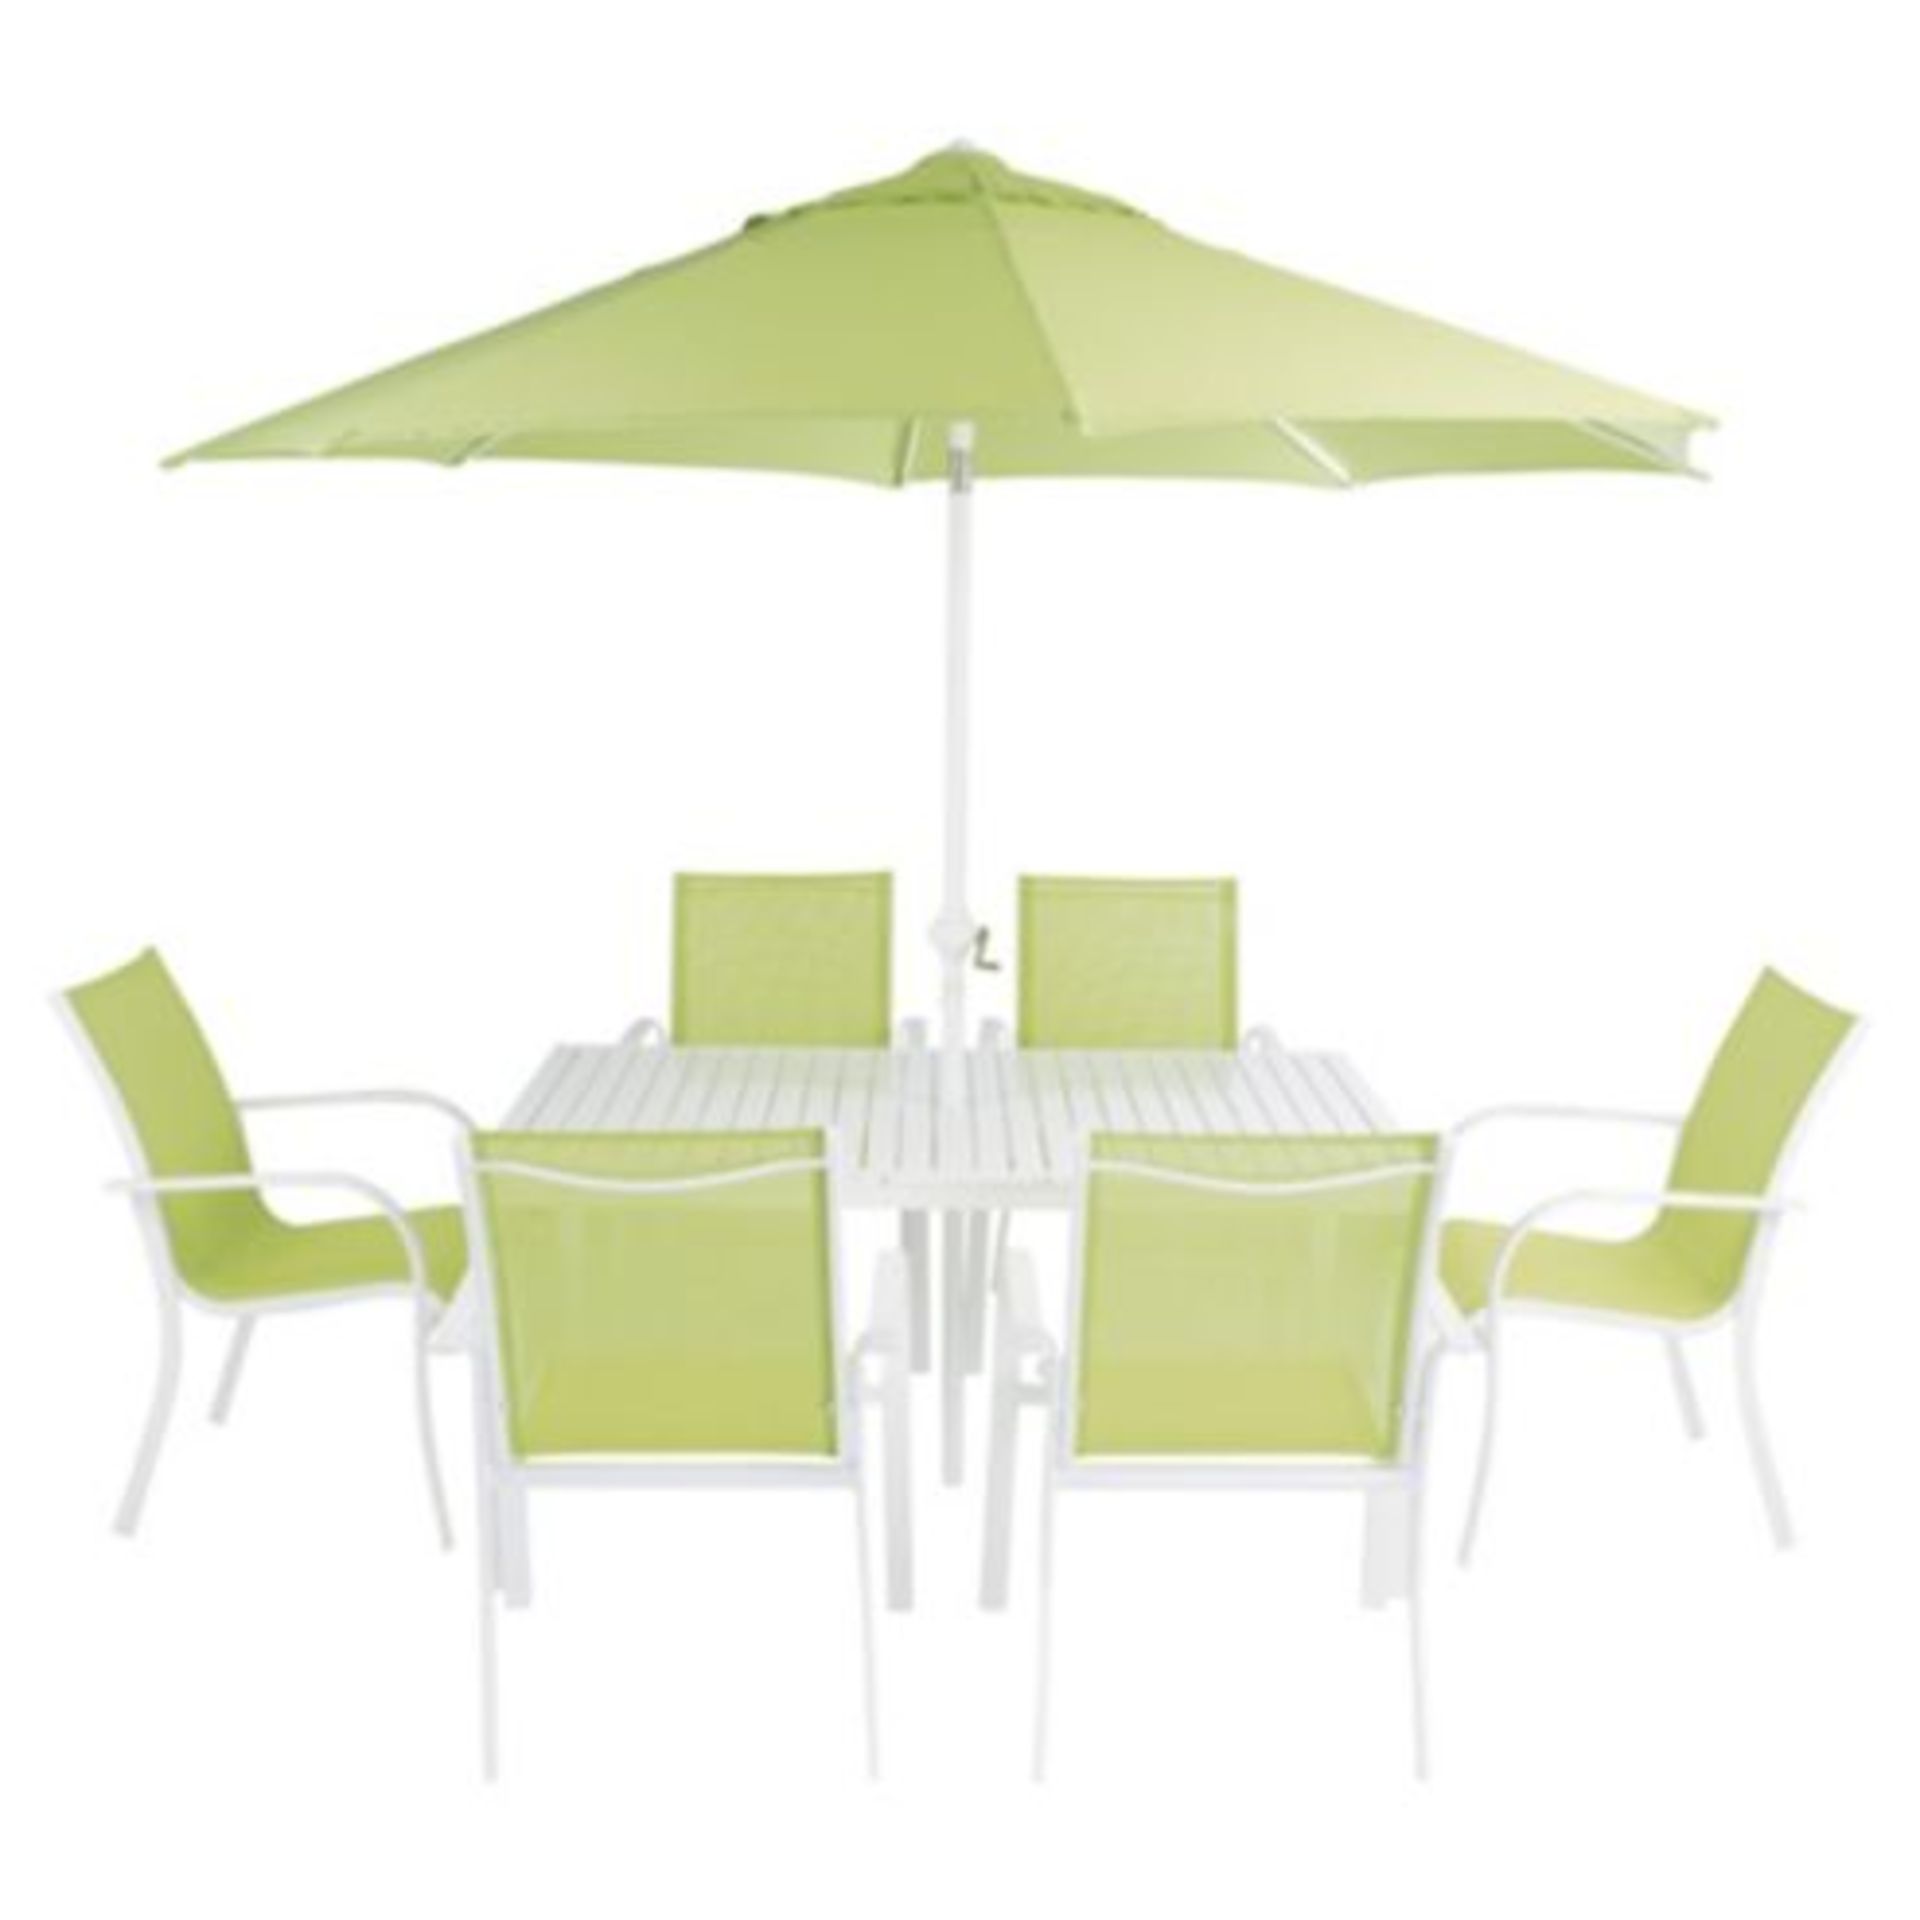 V Brand New 8 Piece Powder Coated Steel Garden Furniture Set Includes 6 Chairs - Table and Parasol - - Image 2 of 2